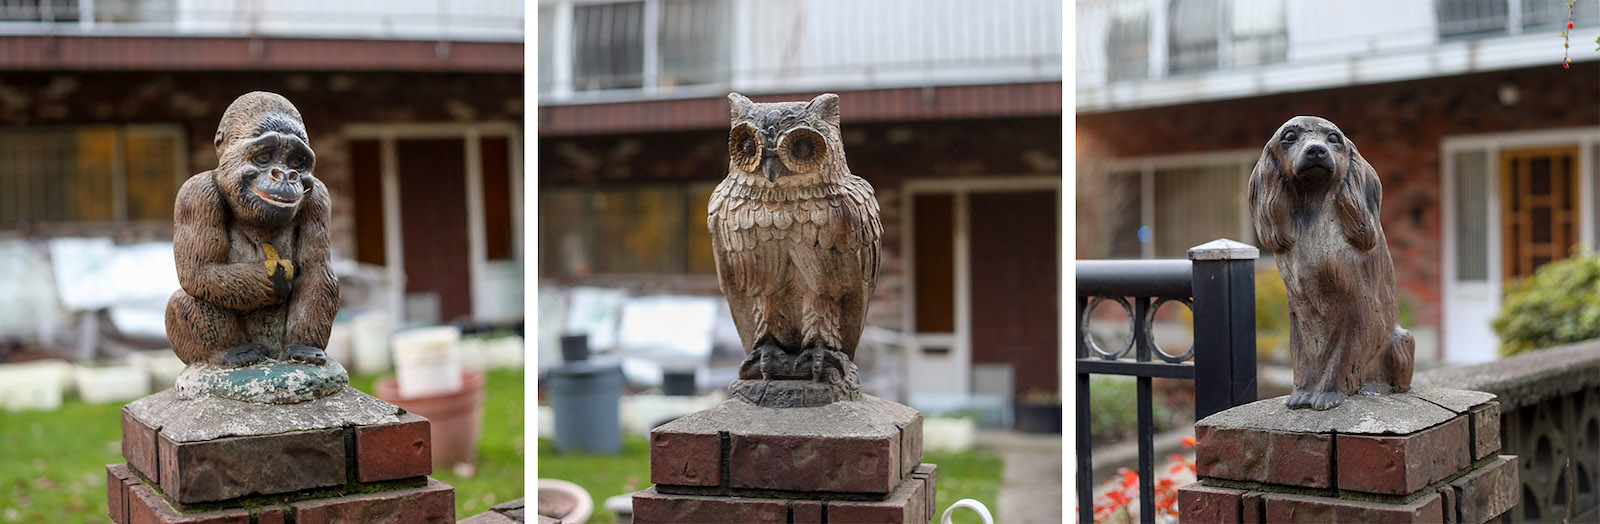 A three-panel images features small statues of, from left to right, a brown gorilla, a brown owl and a brown cocker spaniel atop a red brick post for a gate in front of a Vancouver Special home.